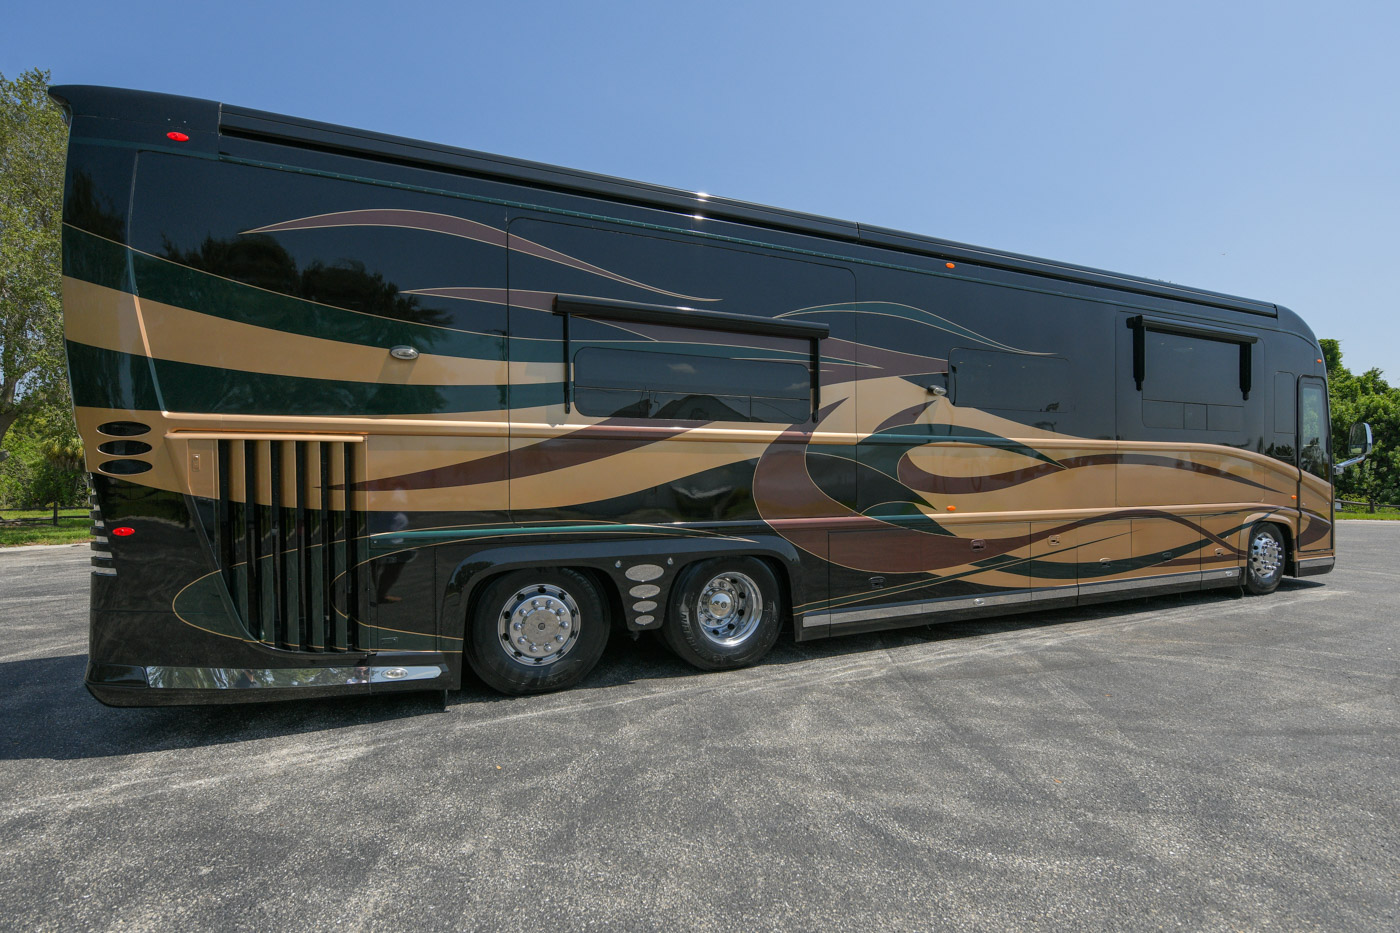 The Motorcoach